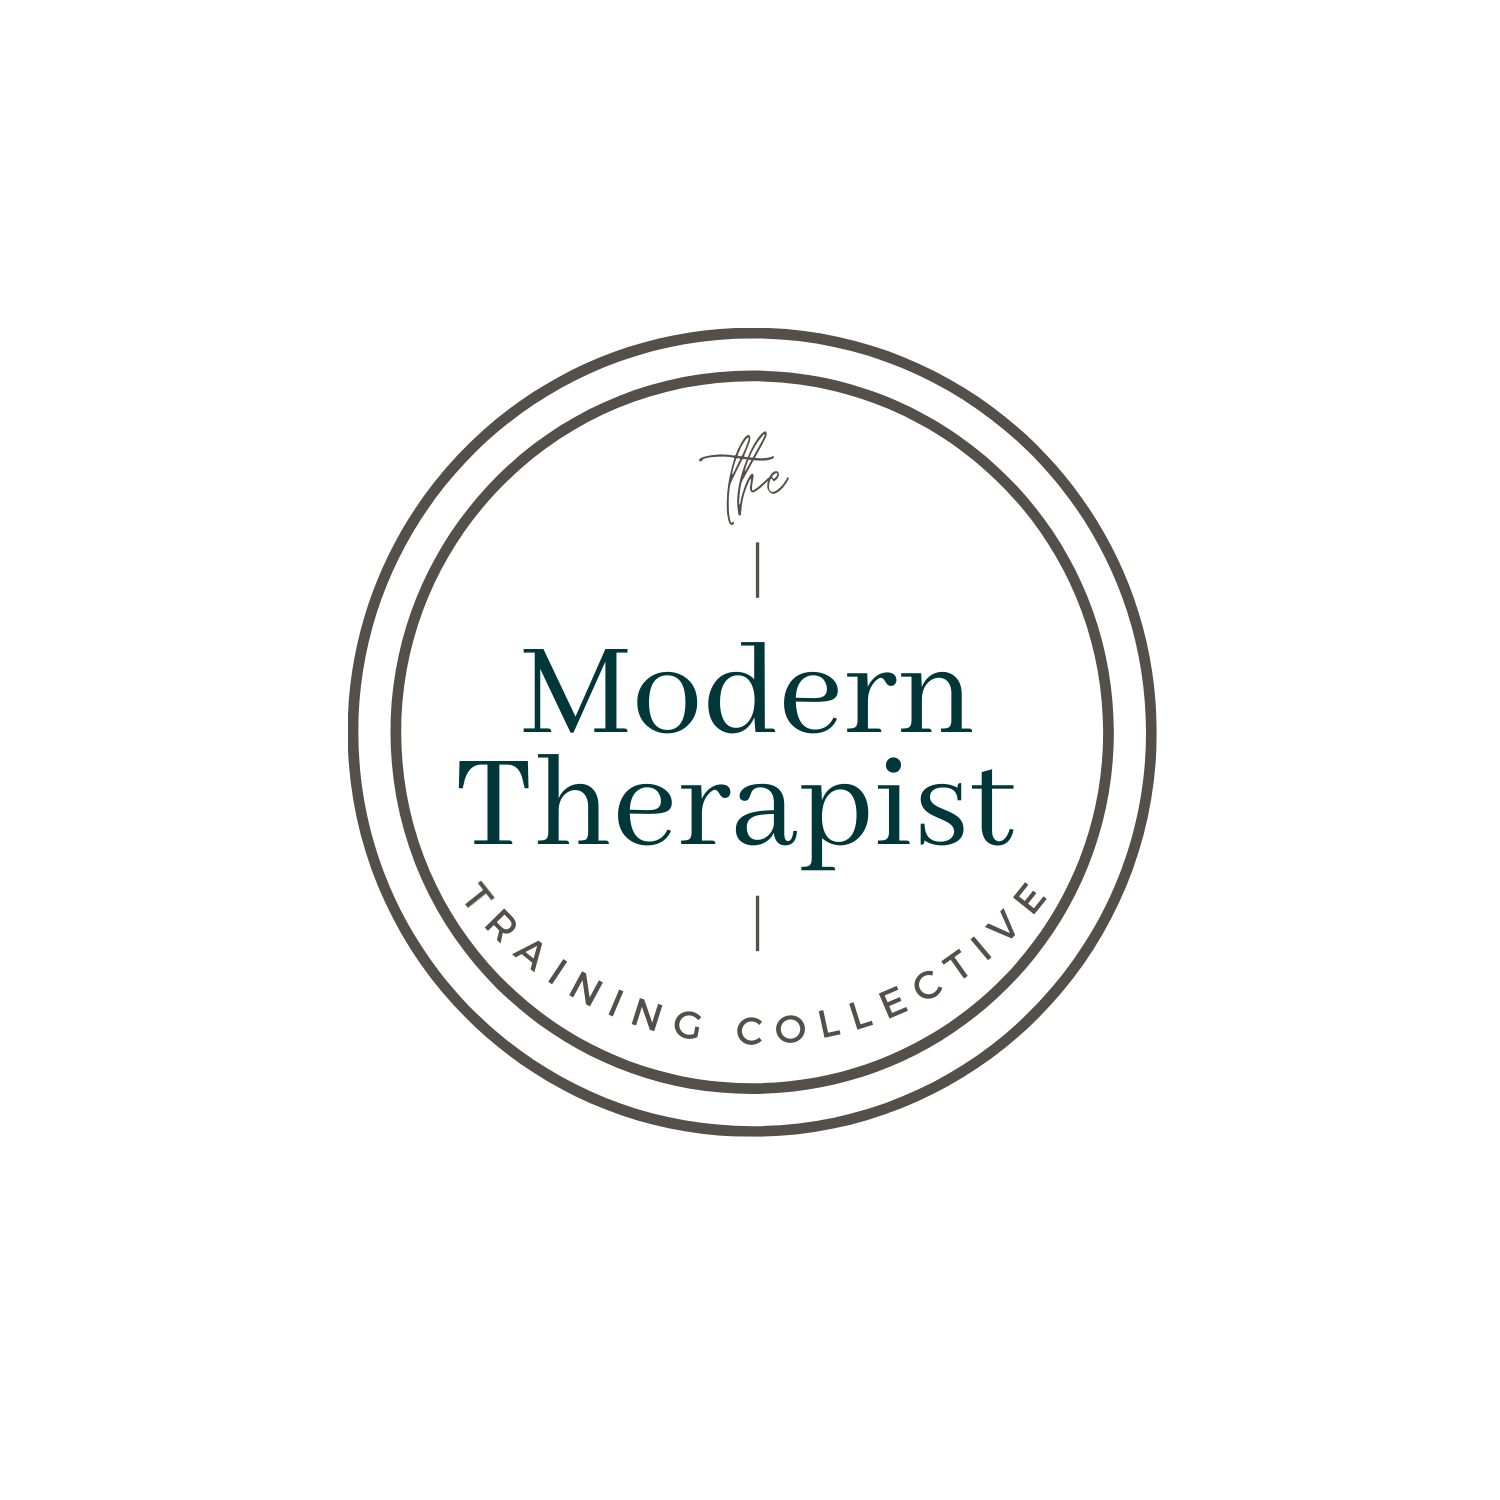 Modern Therapist Training Collective